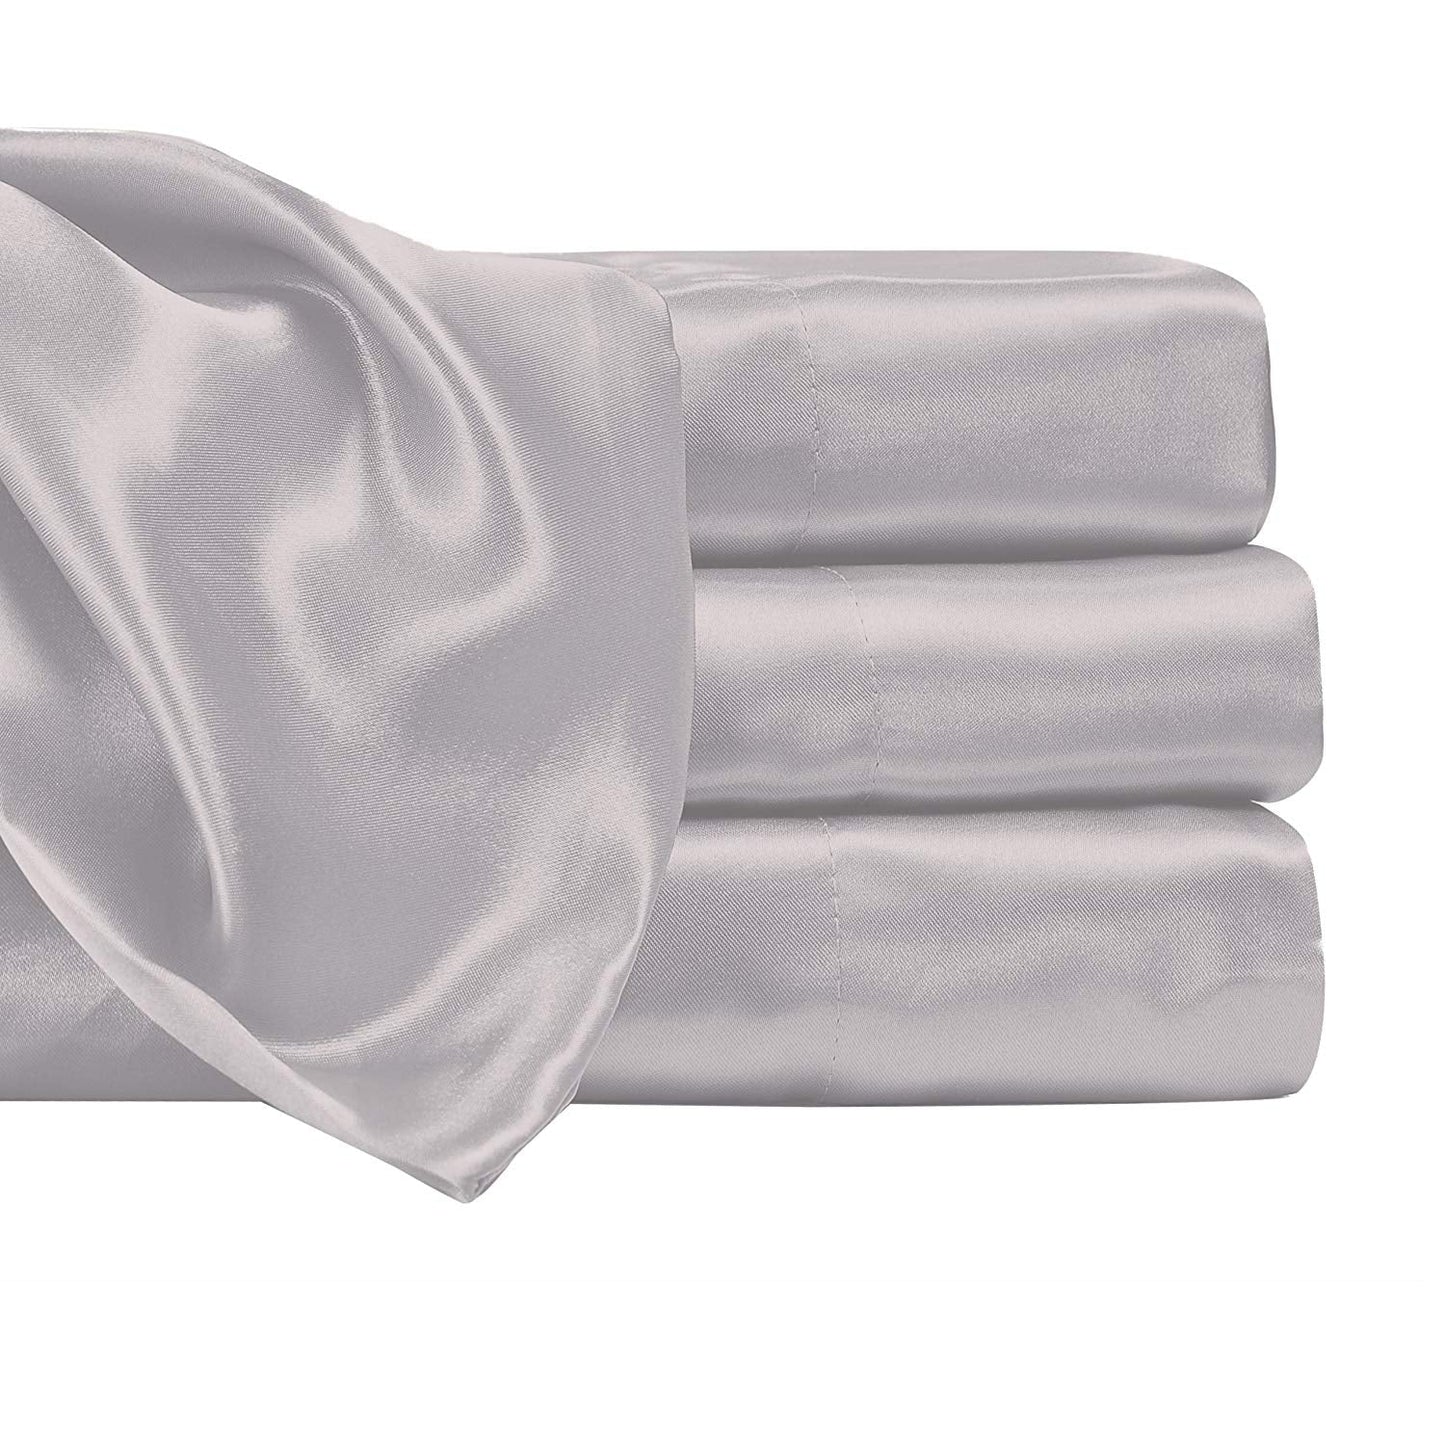 15 Inch Pocket Sheet Set 4Pc Mulberry Sateen Silk Silver Grey at - www.egyptianhomelinens.com